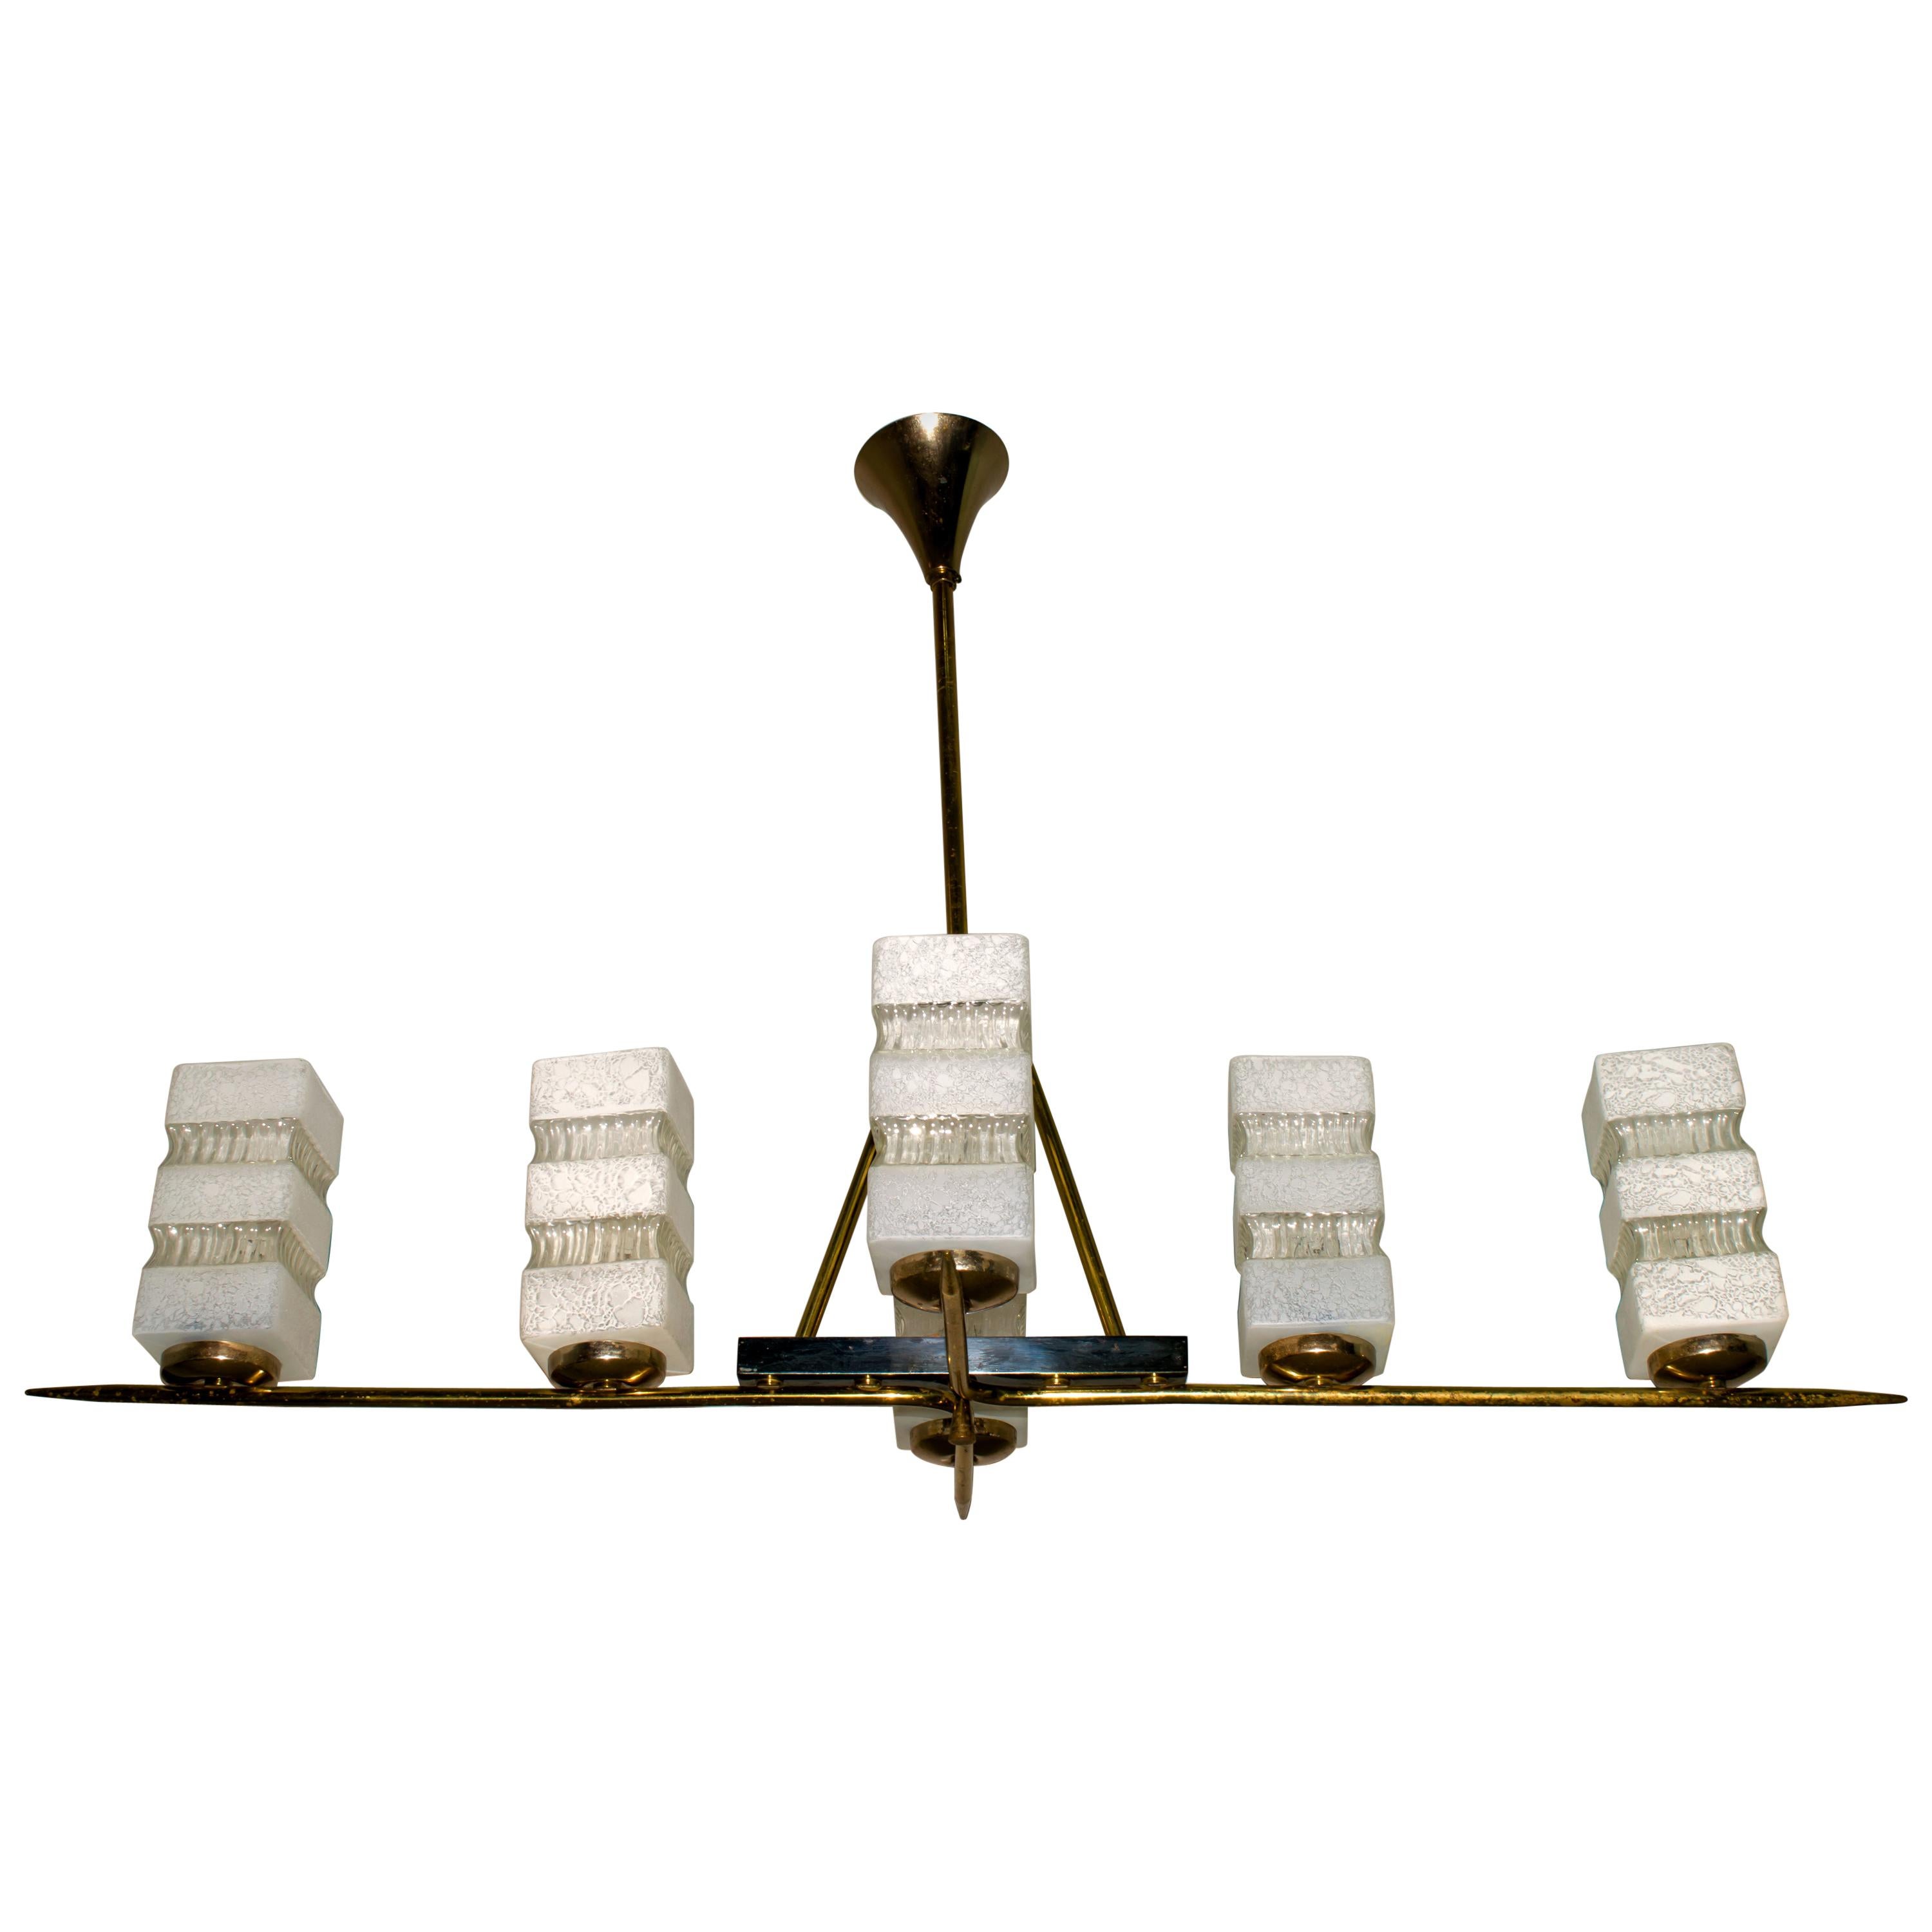 Maison Arlus Mid-Century Modern France Brass and Glass Chandelier, 1950s